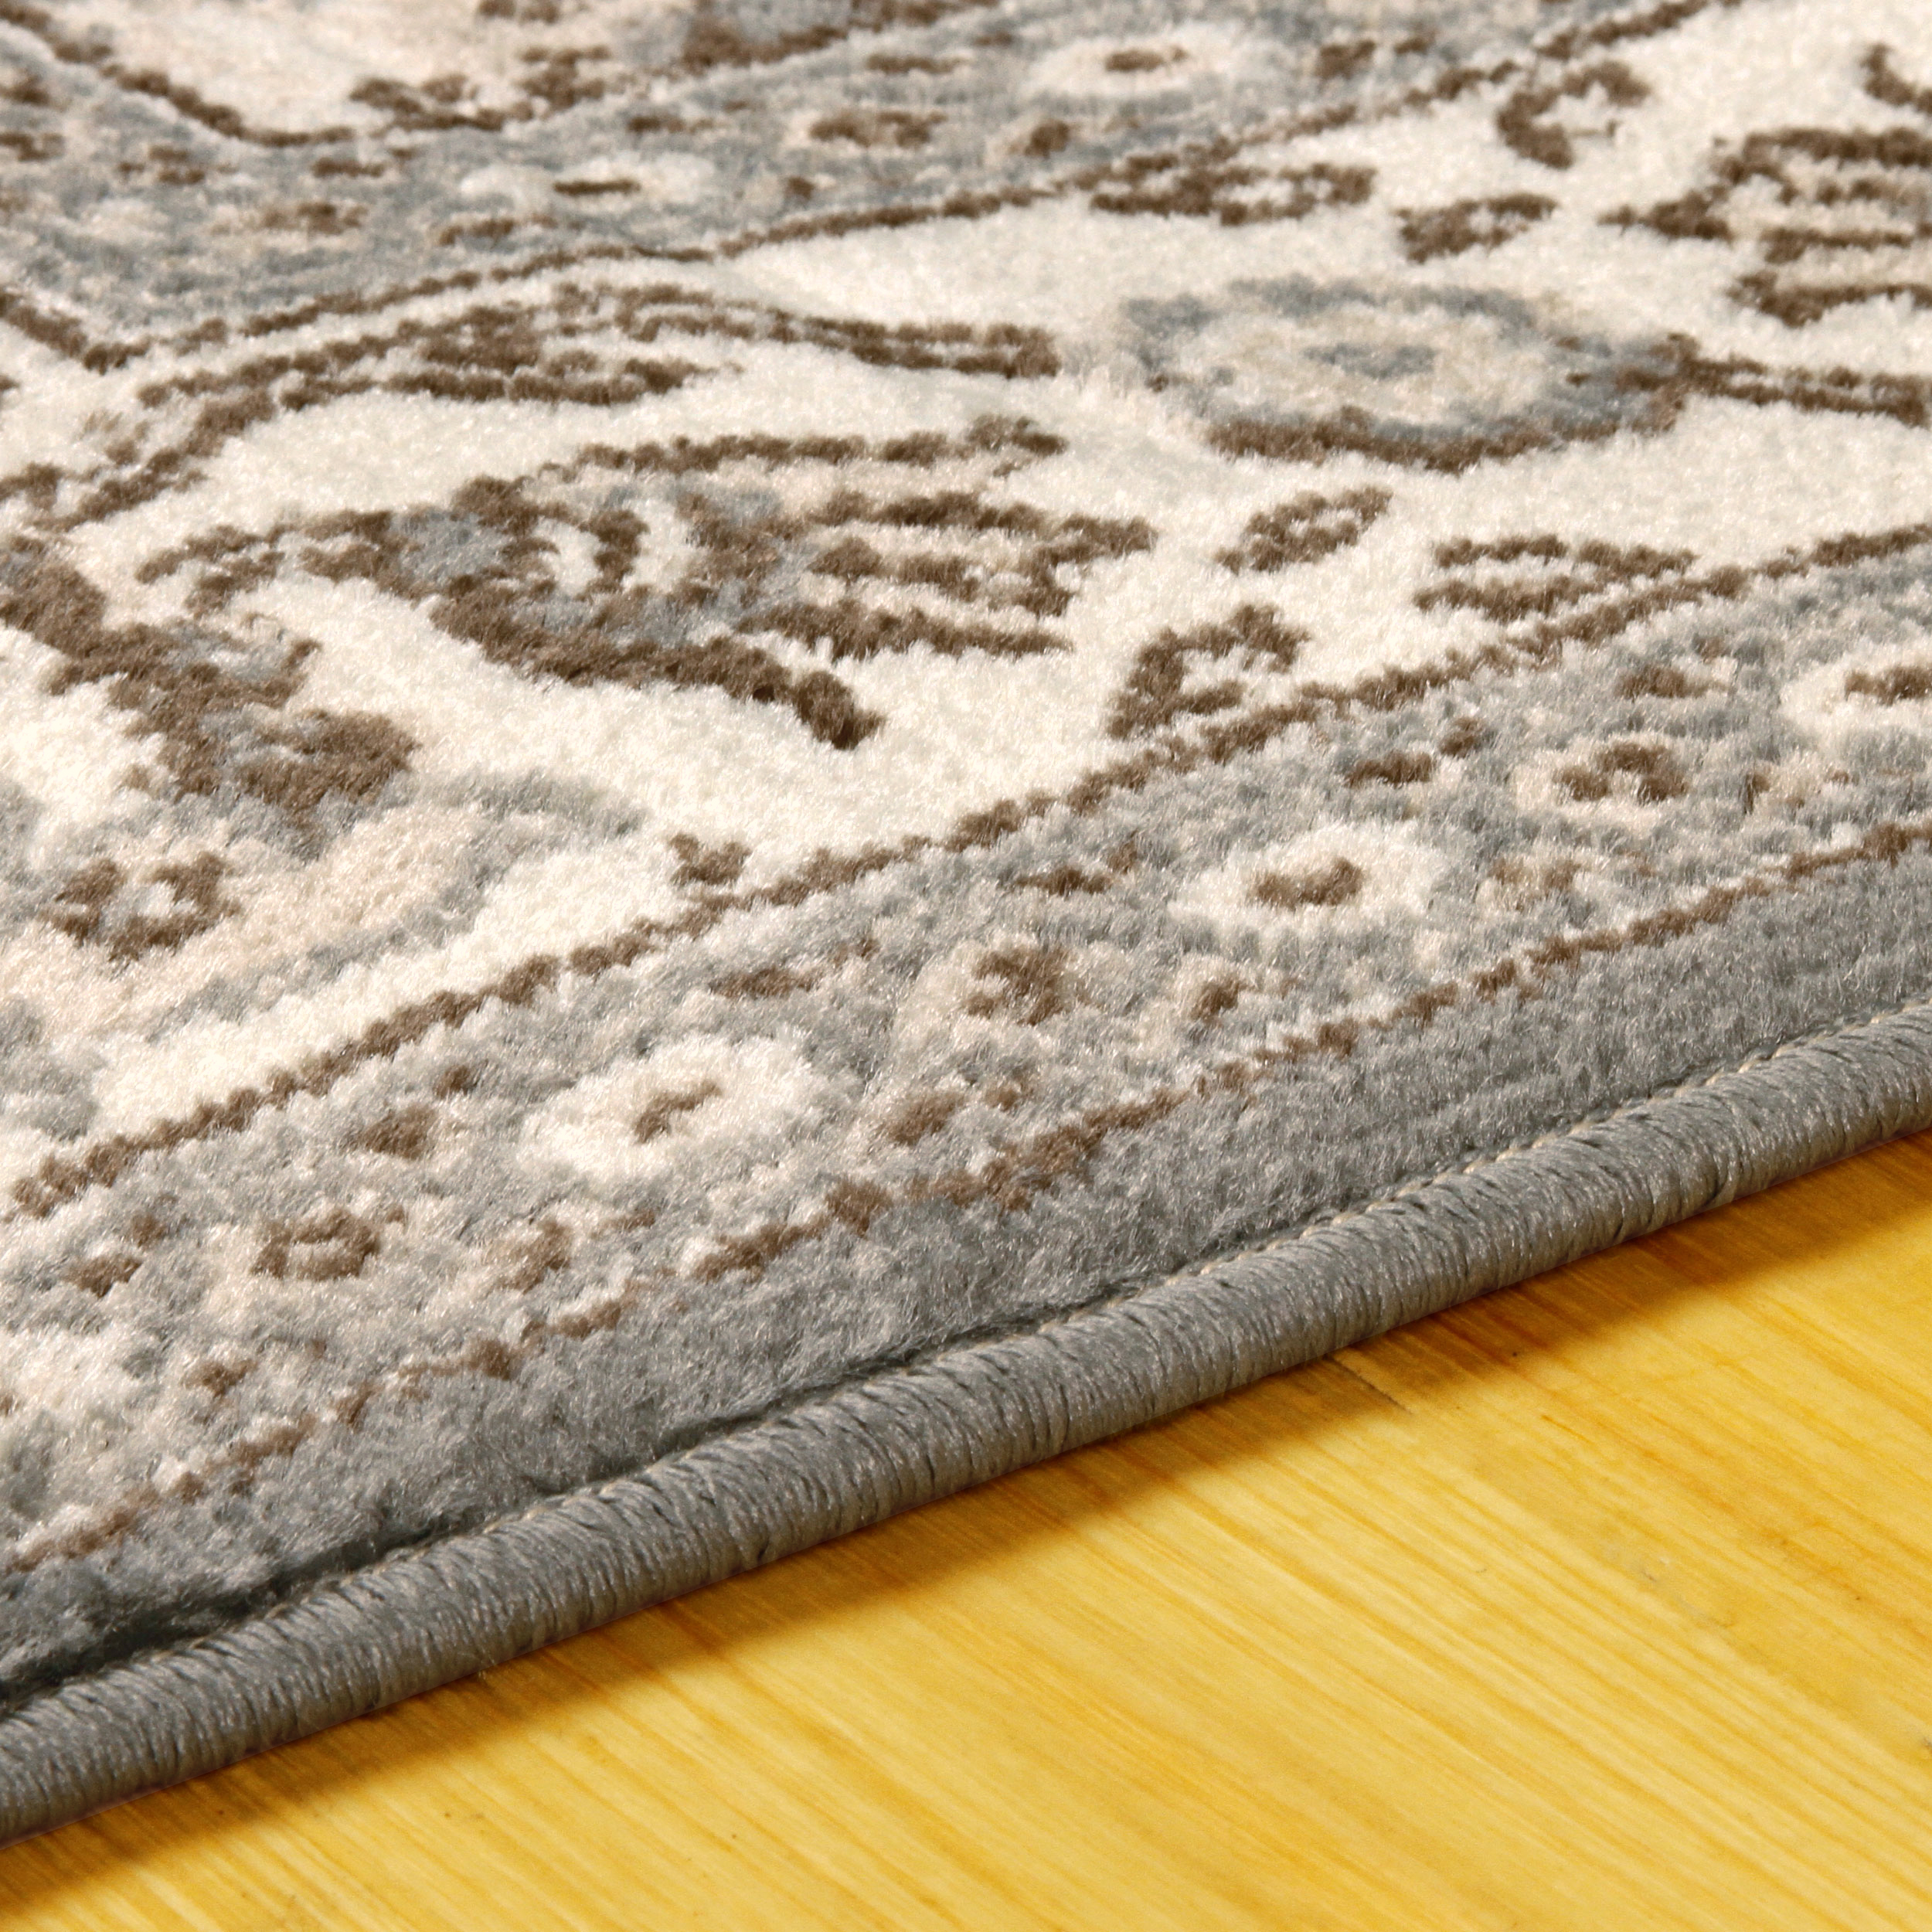 Kingfield Designer Area Rug Collection - image 4 of 5